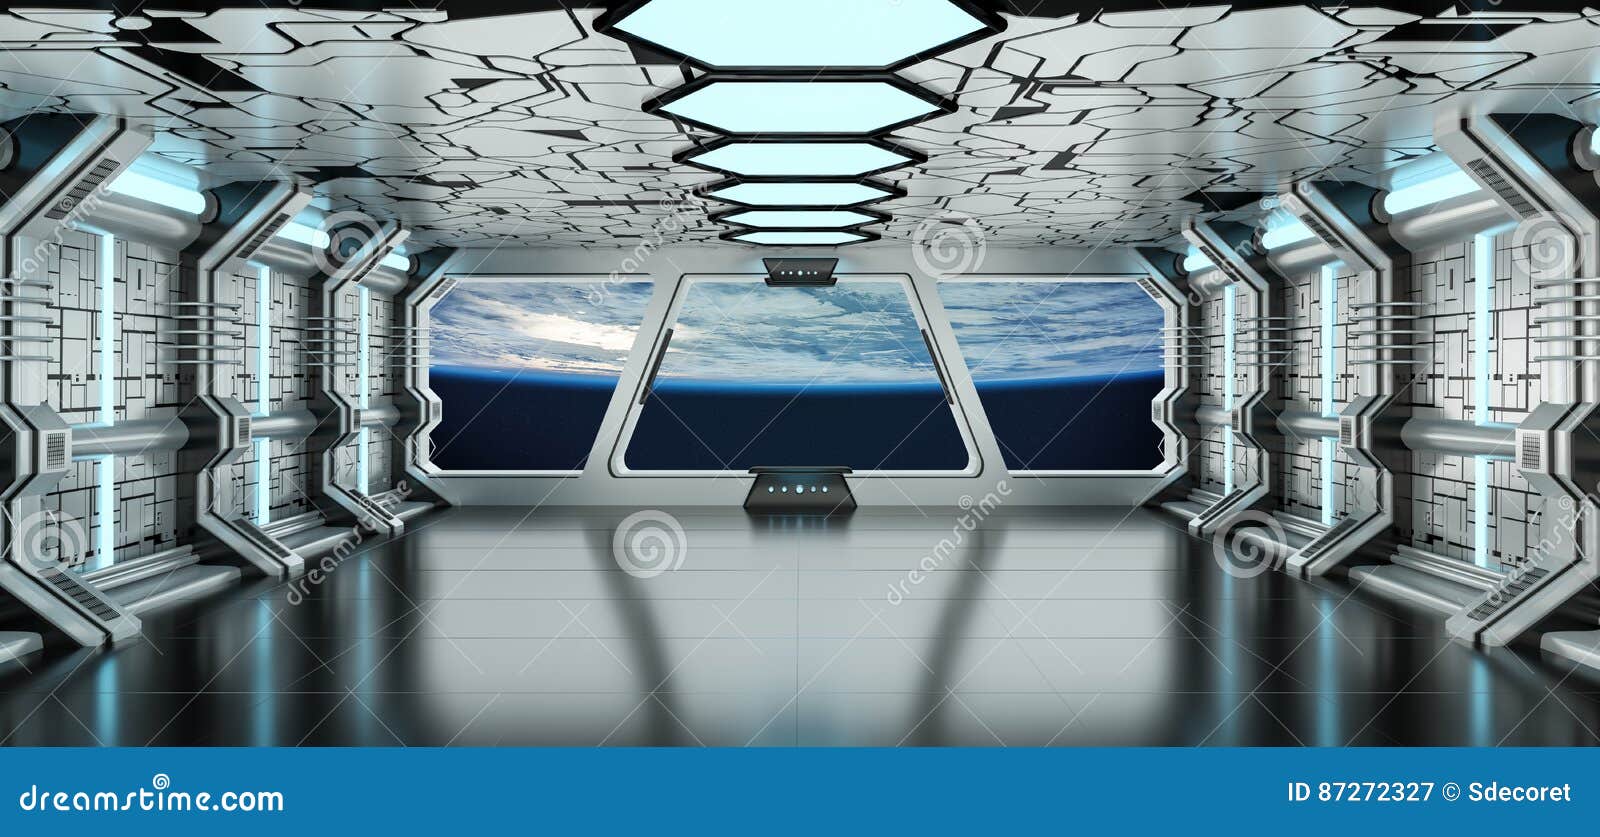 Spaceship Interior With View On The Planet Earth 3d